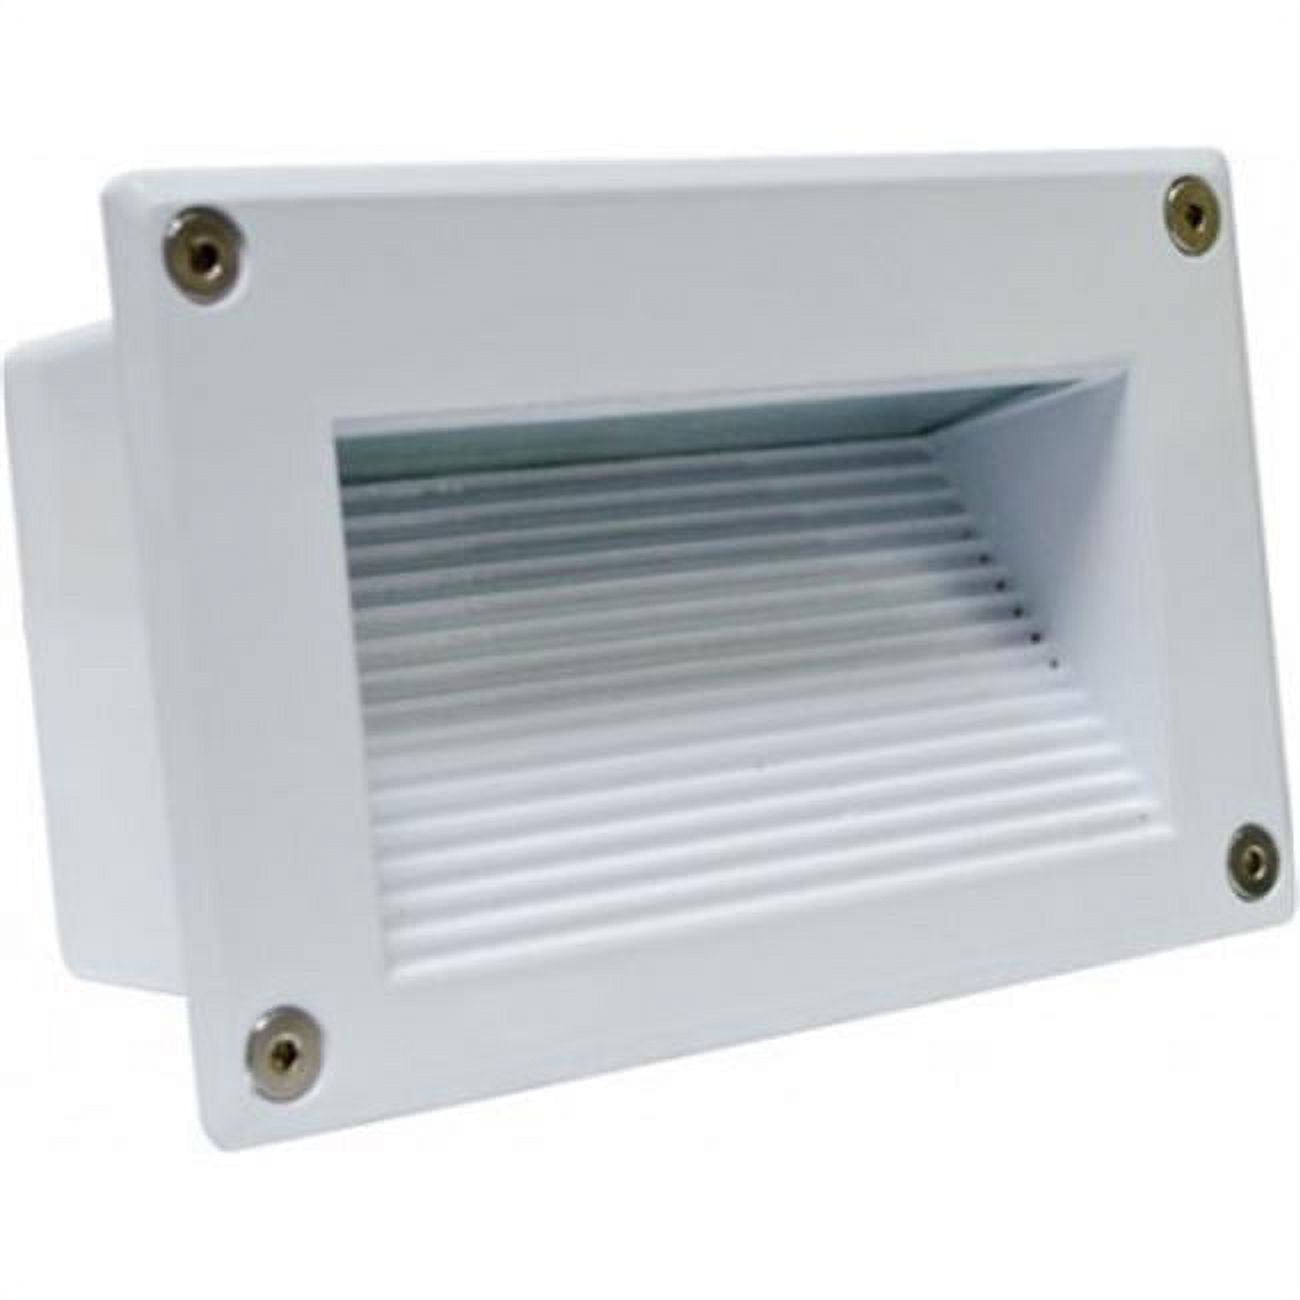 Picture of Dabmar Lighting LV655-W Cast Aluminum Recessed Hooded Brick, Step & Wall Light, White - 3.88 x 6.44 x 2.63 in.